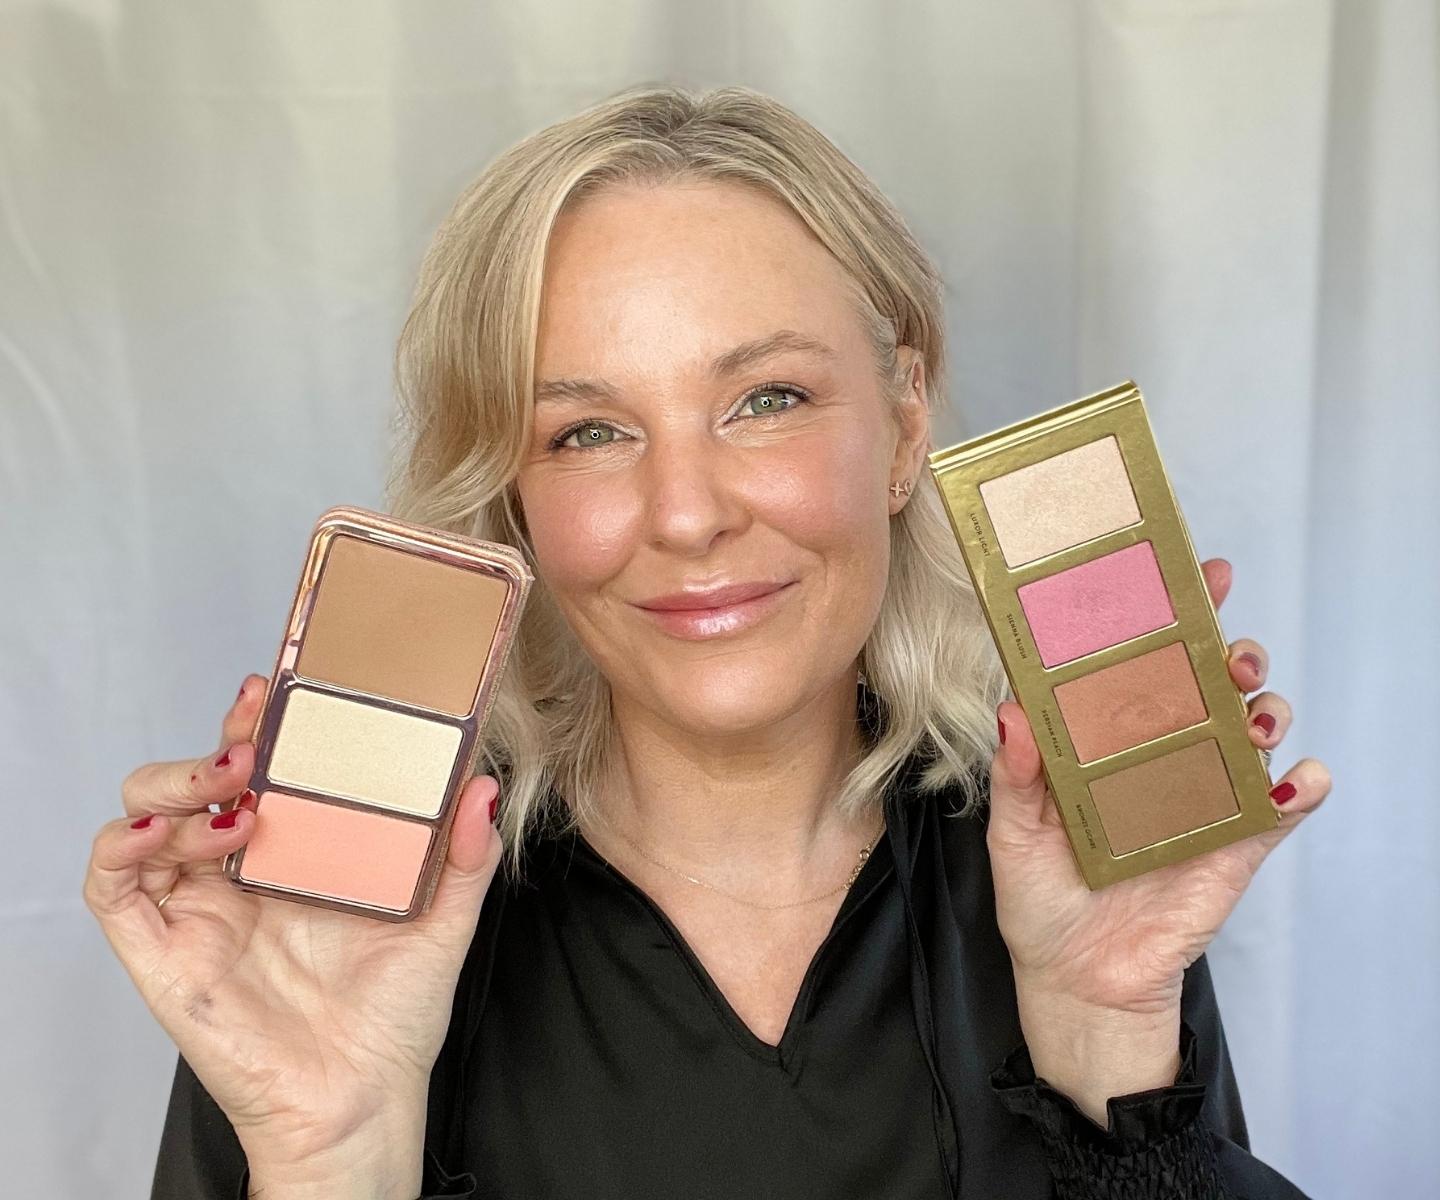 An Over 40s Makeup Artist on Exactly How to Do Blush, Highlighter & Contour for Mature Skin.